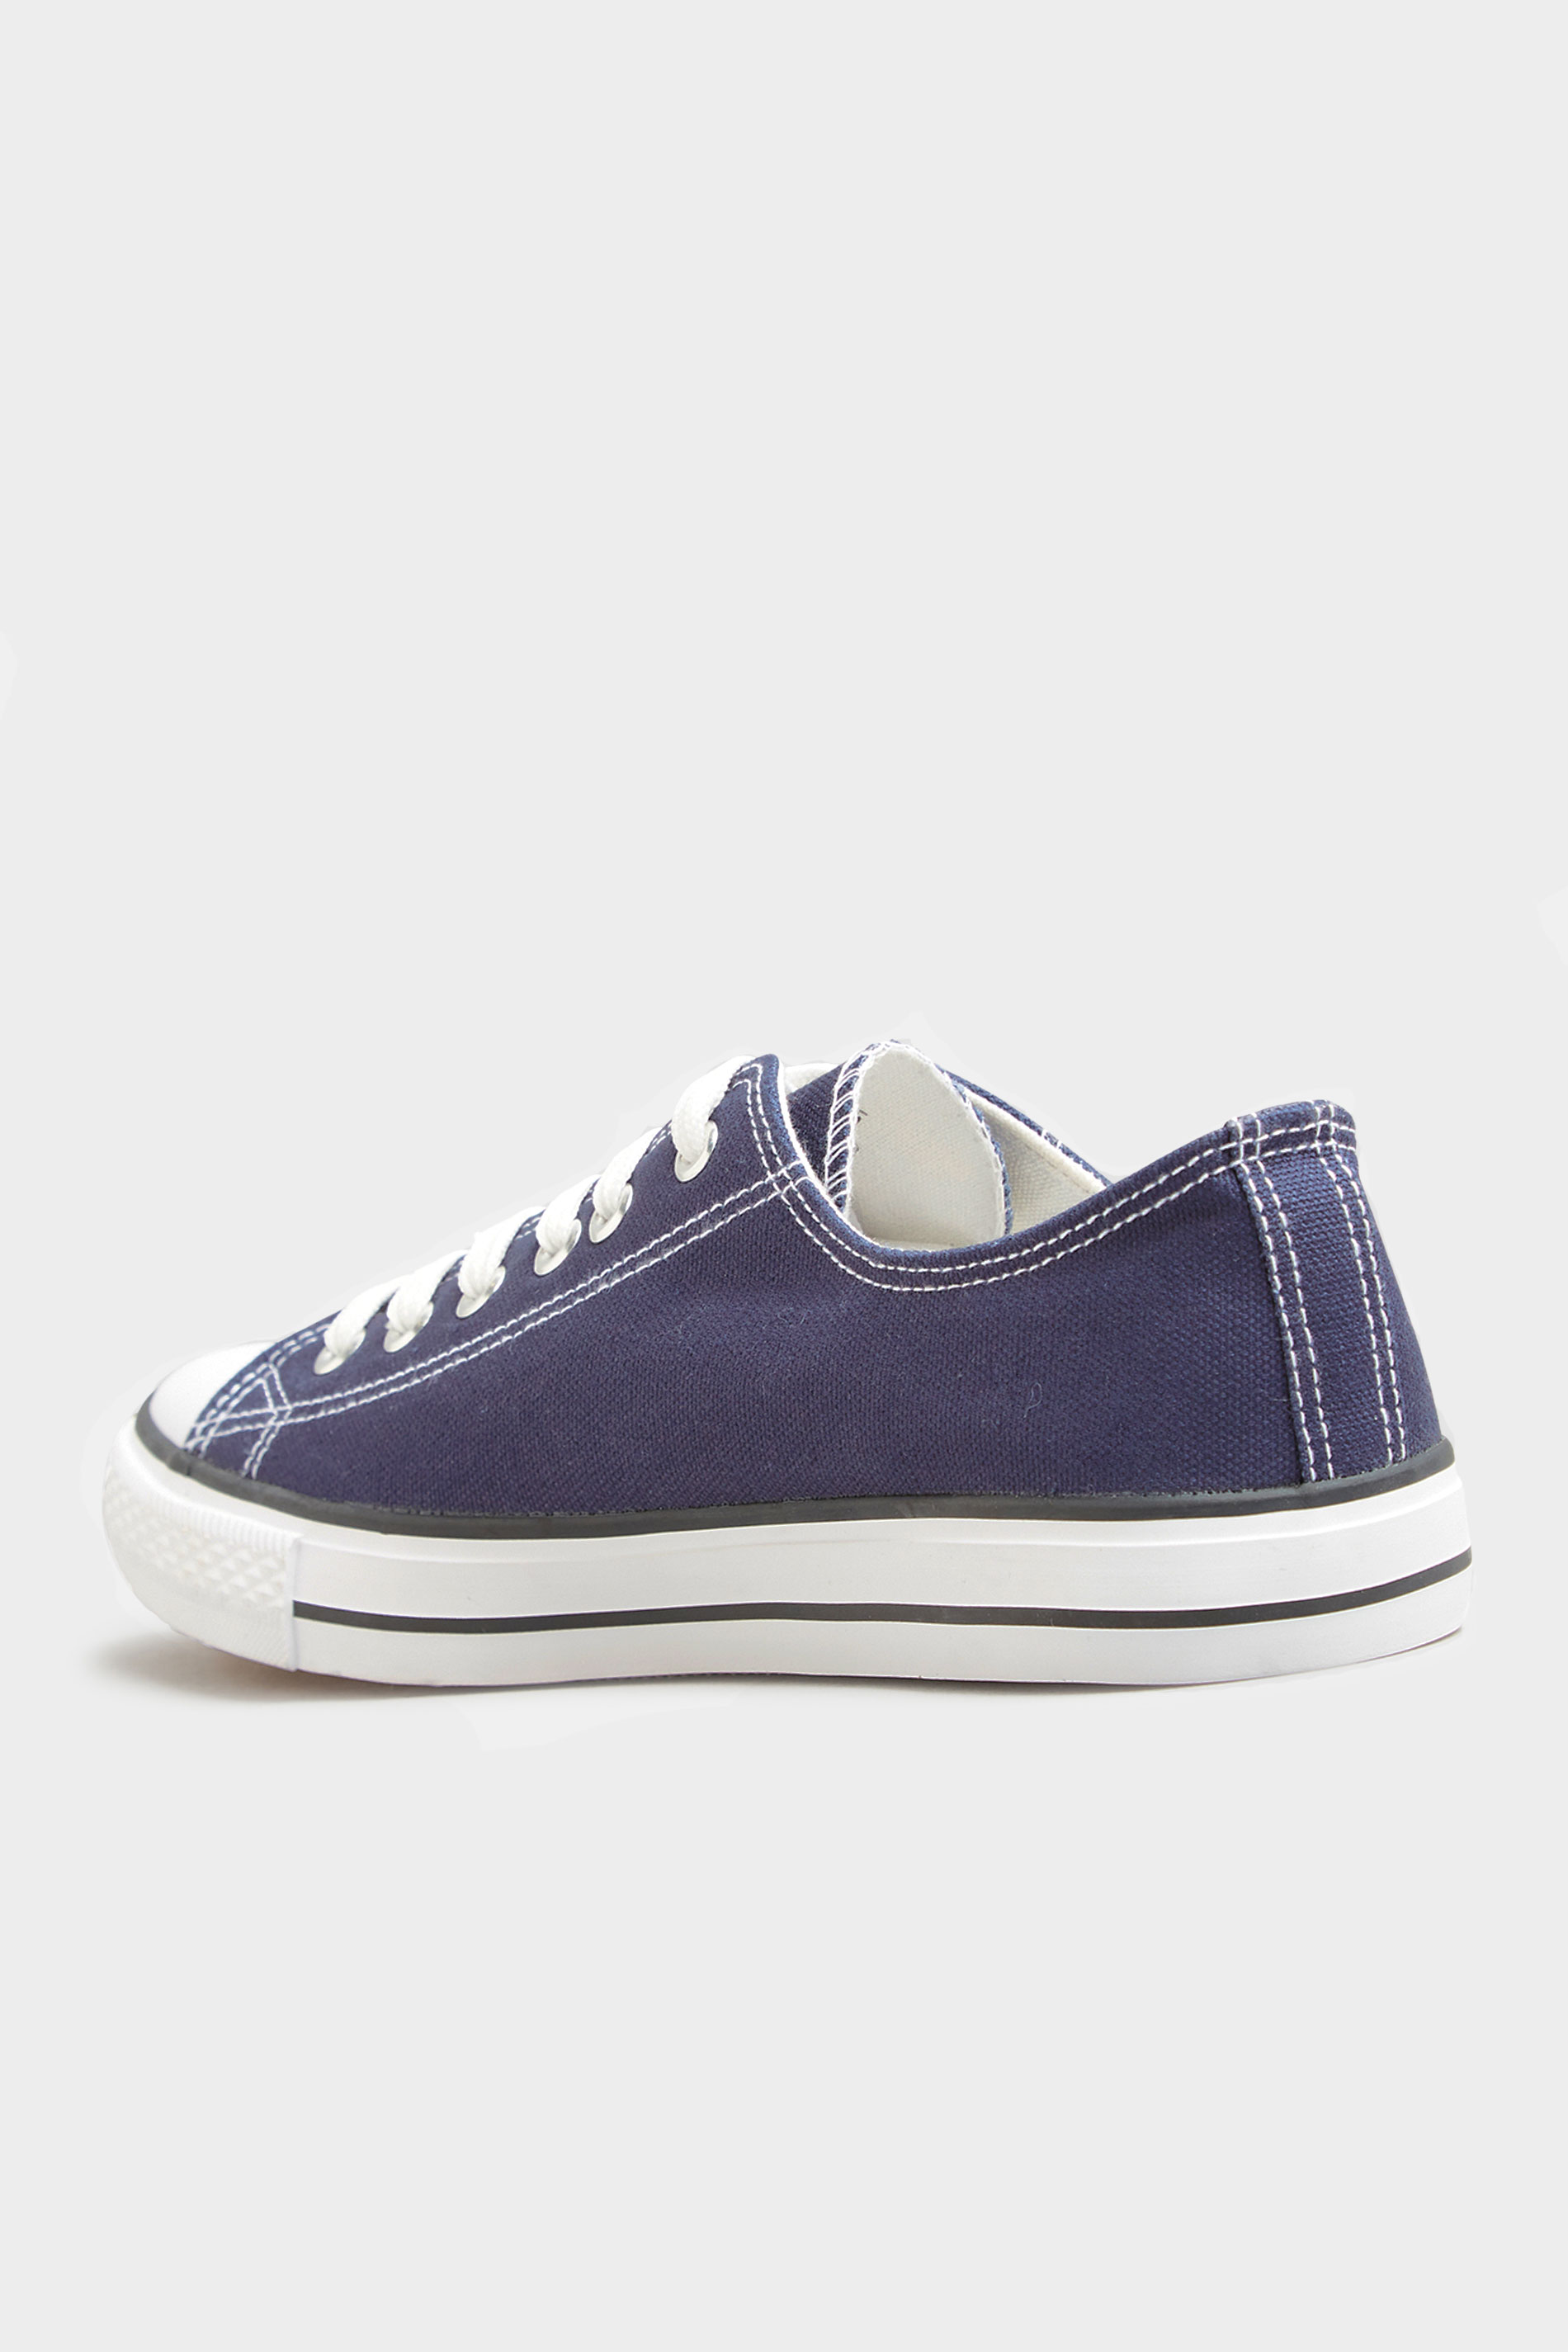 Yours Clothing Navy Blue Low Canvas Trainer In Wide E Fit Womens Shoes Trainers Low-top trainers 